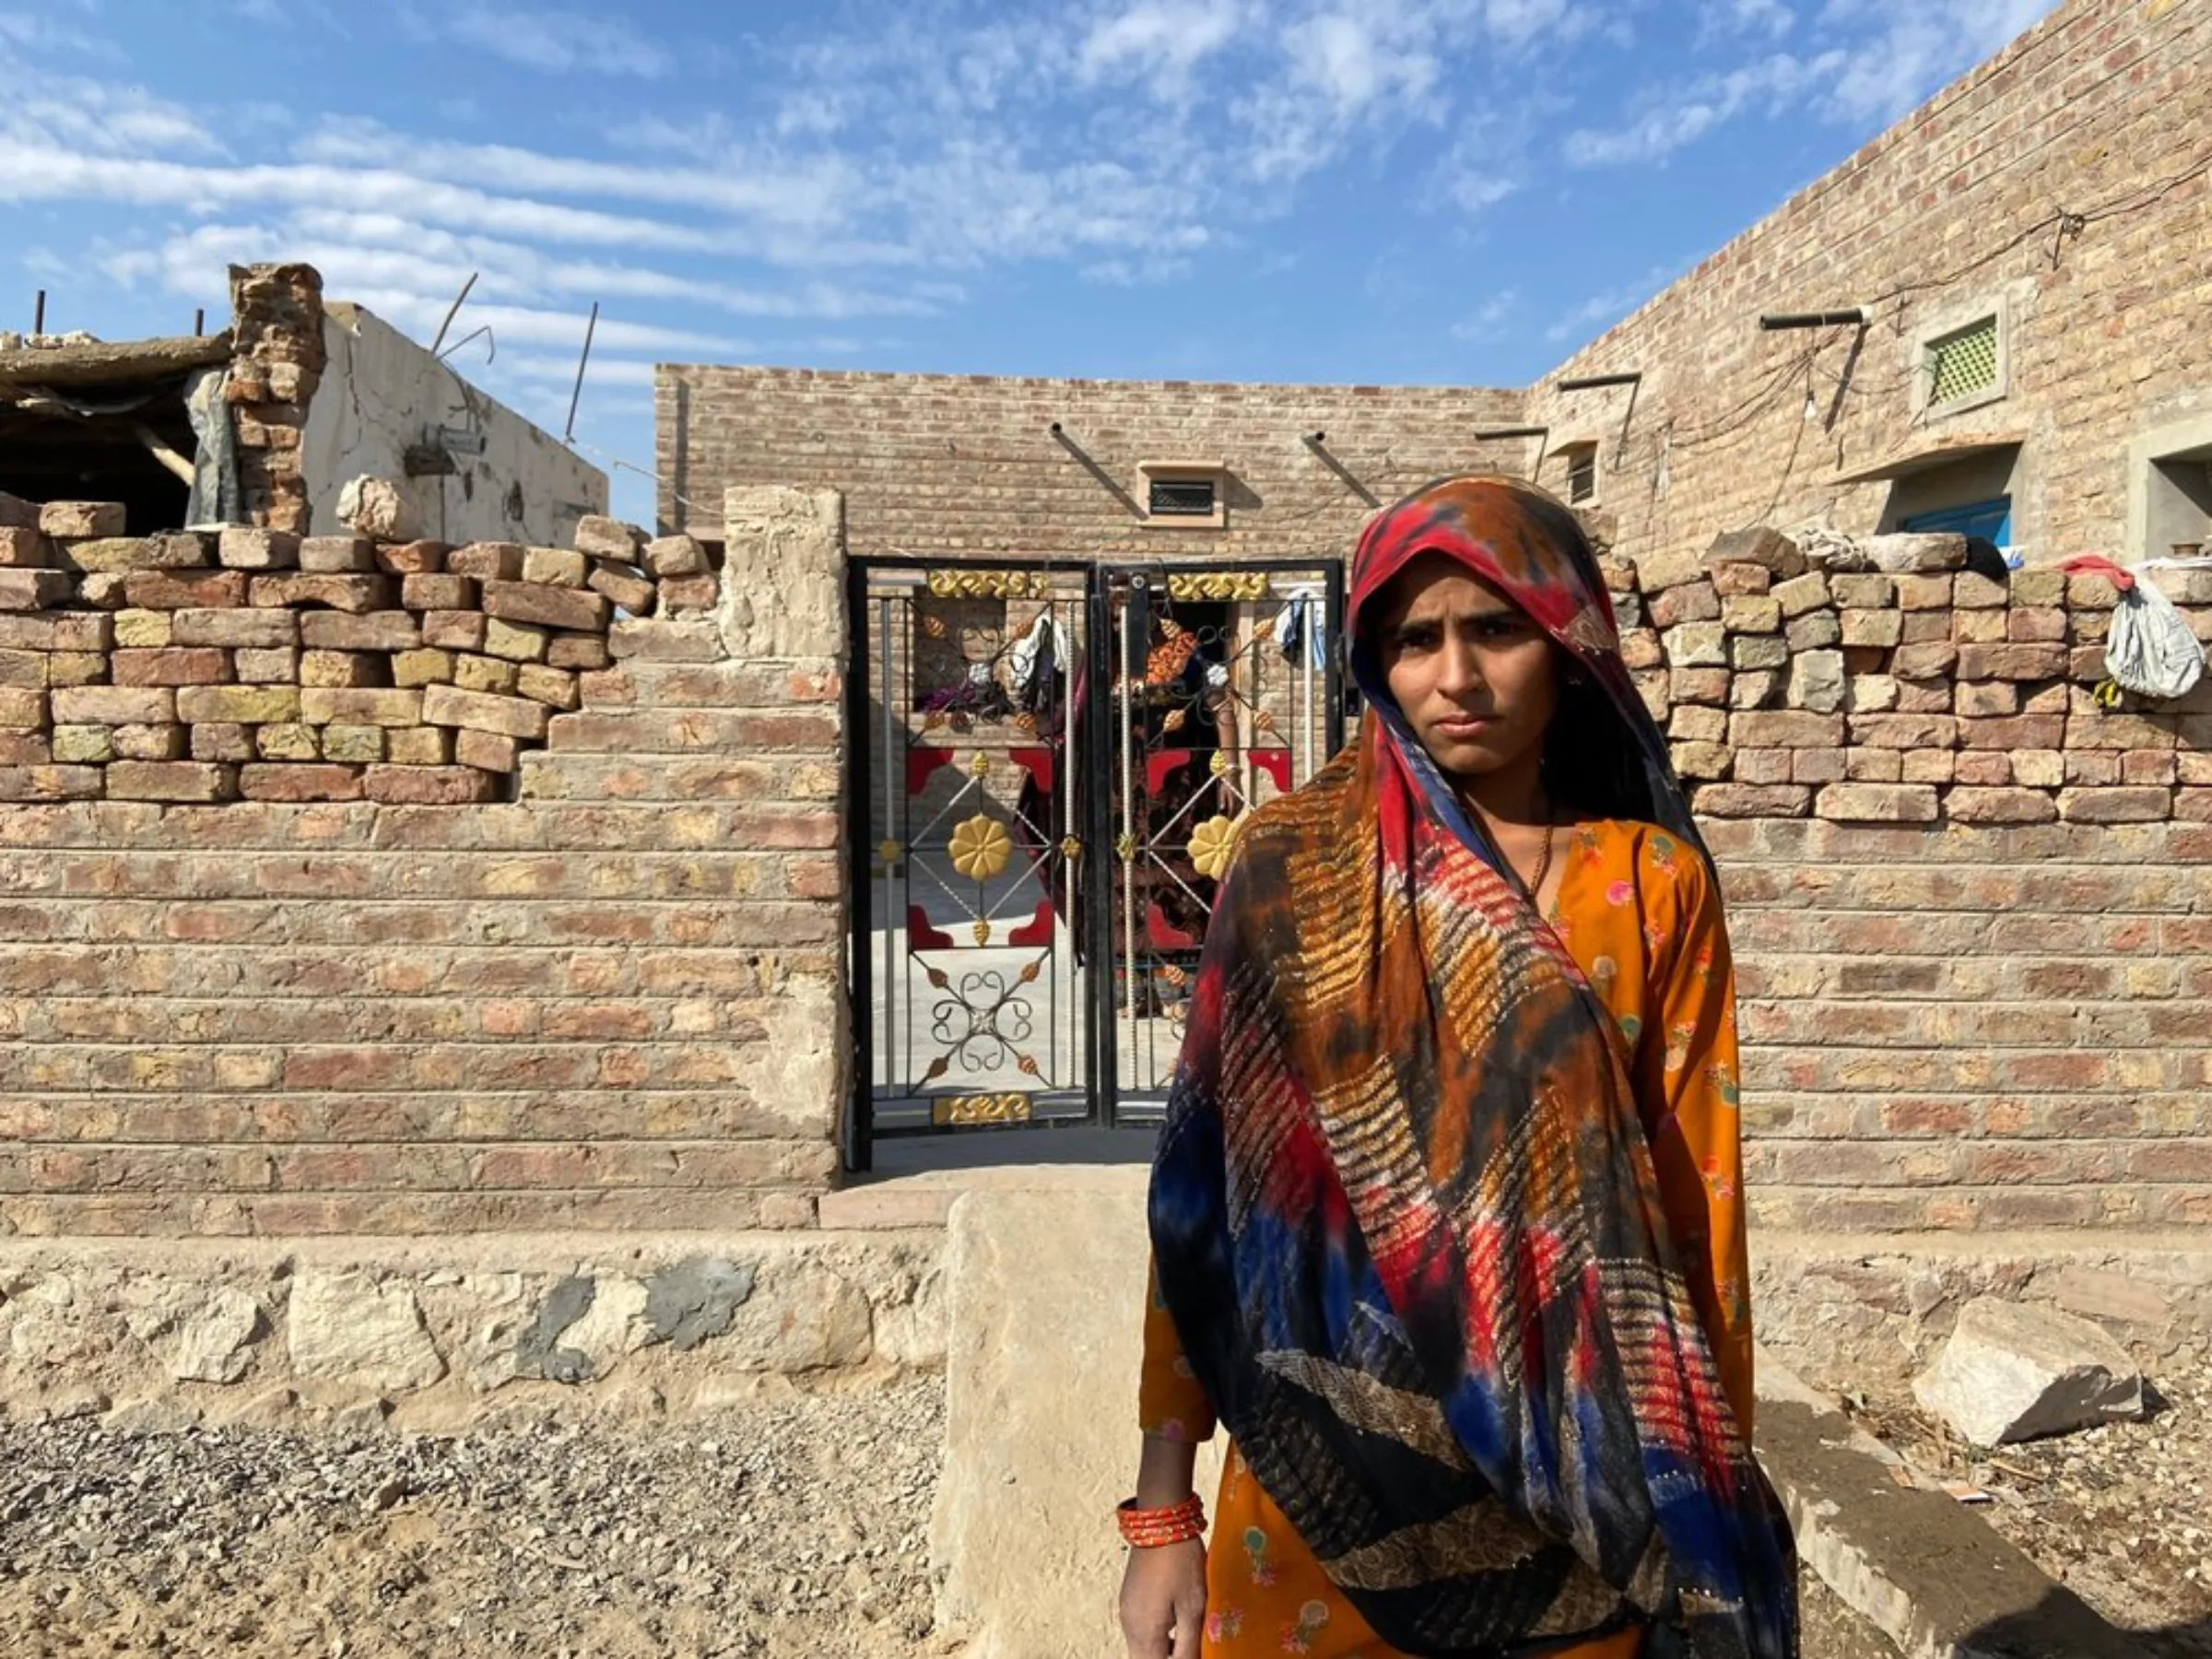 Teenager Hira Bano poses for a picture in front of her house near Bhadla Solar Park, Rajasthan, India, December 12, 2021